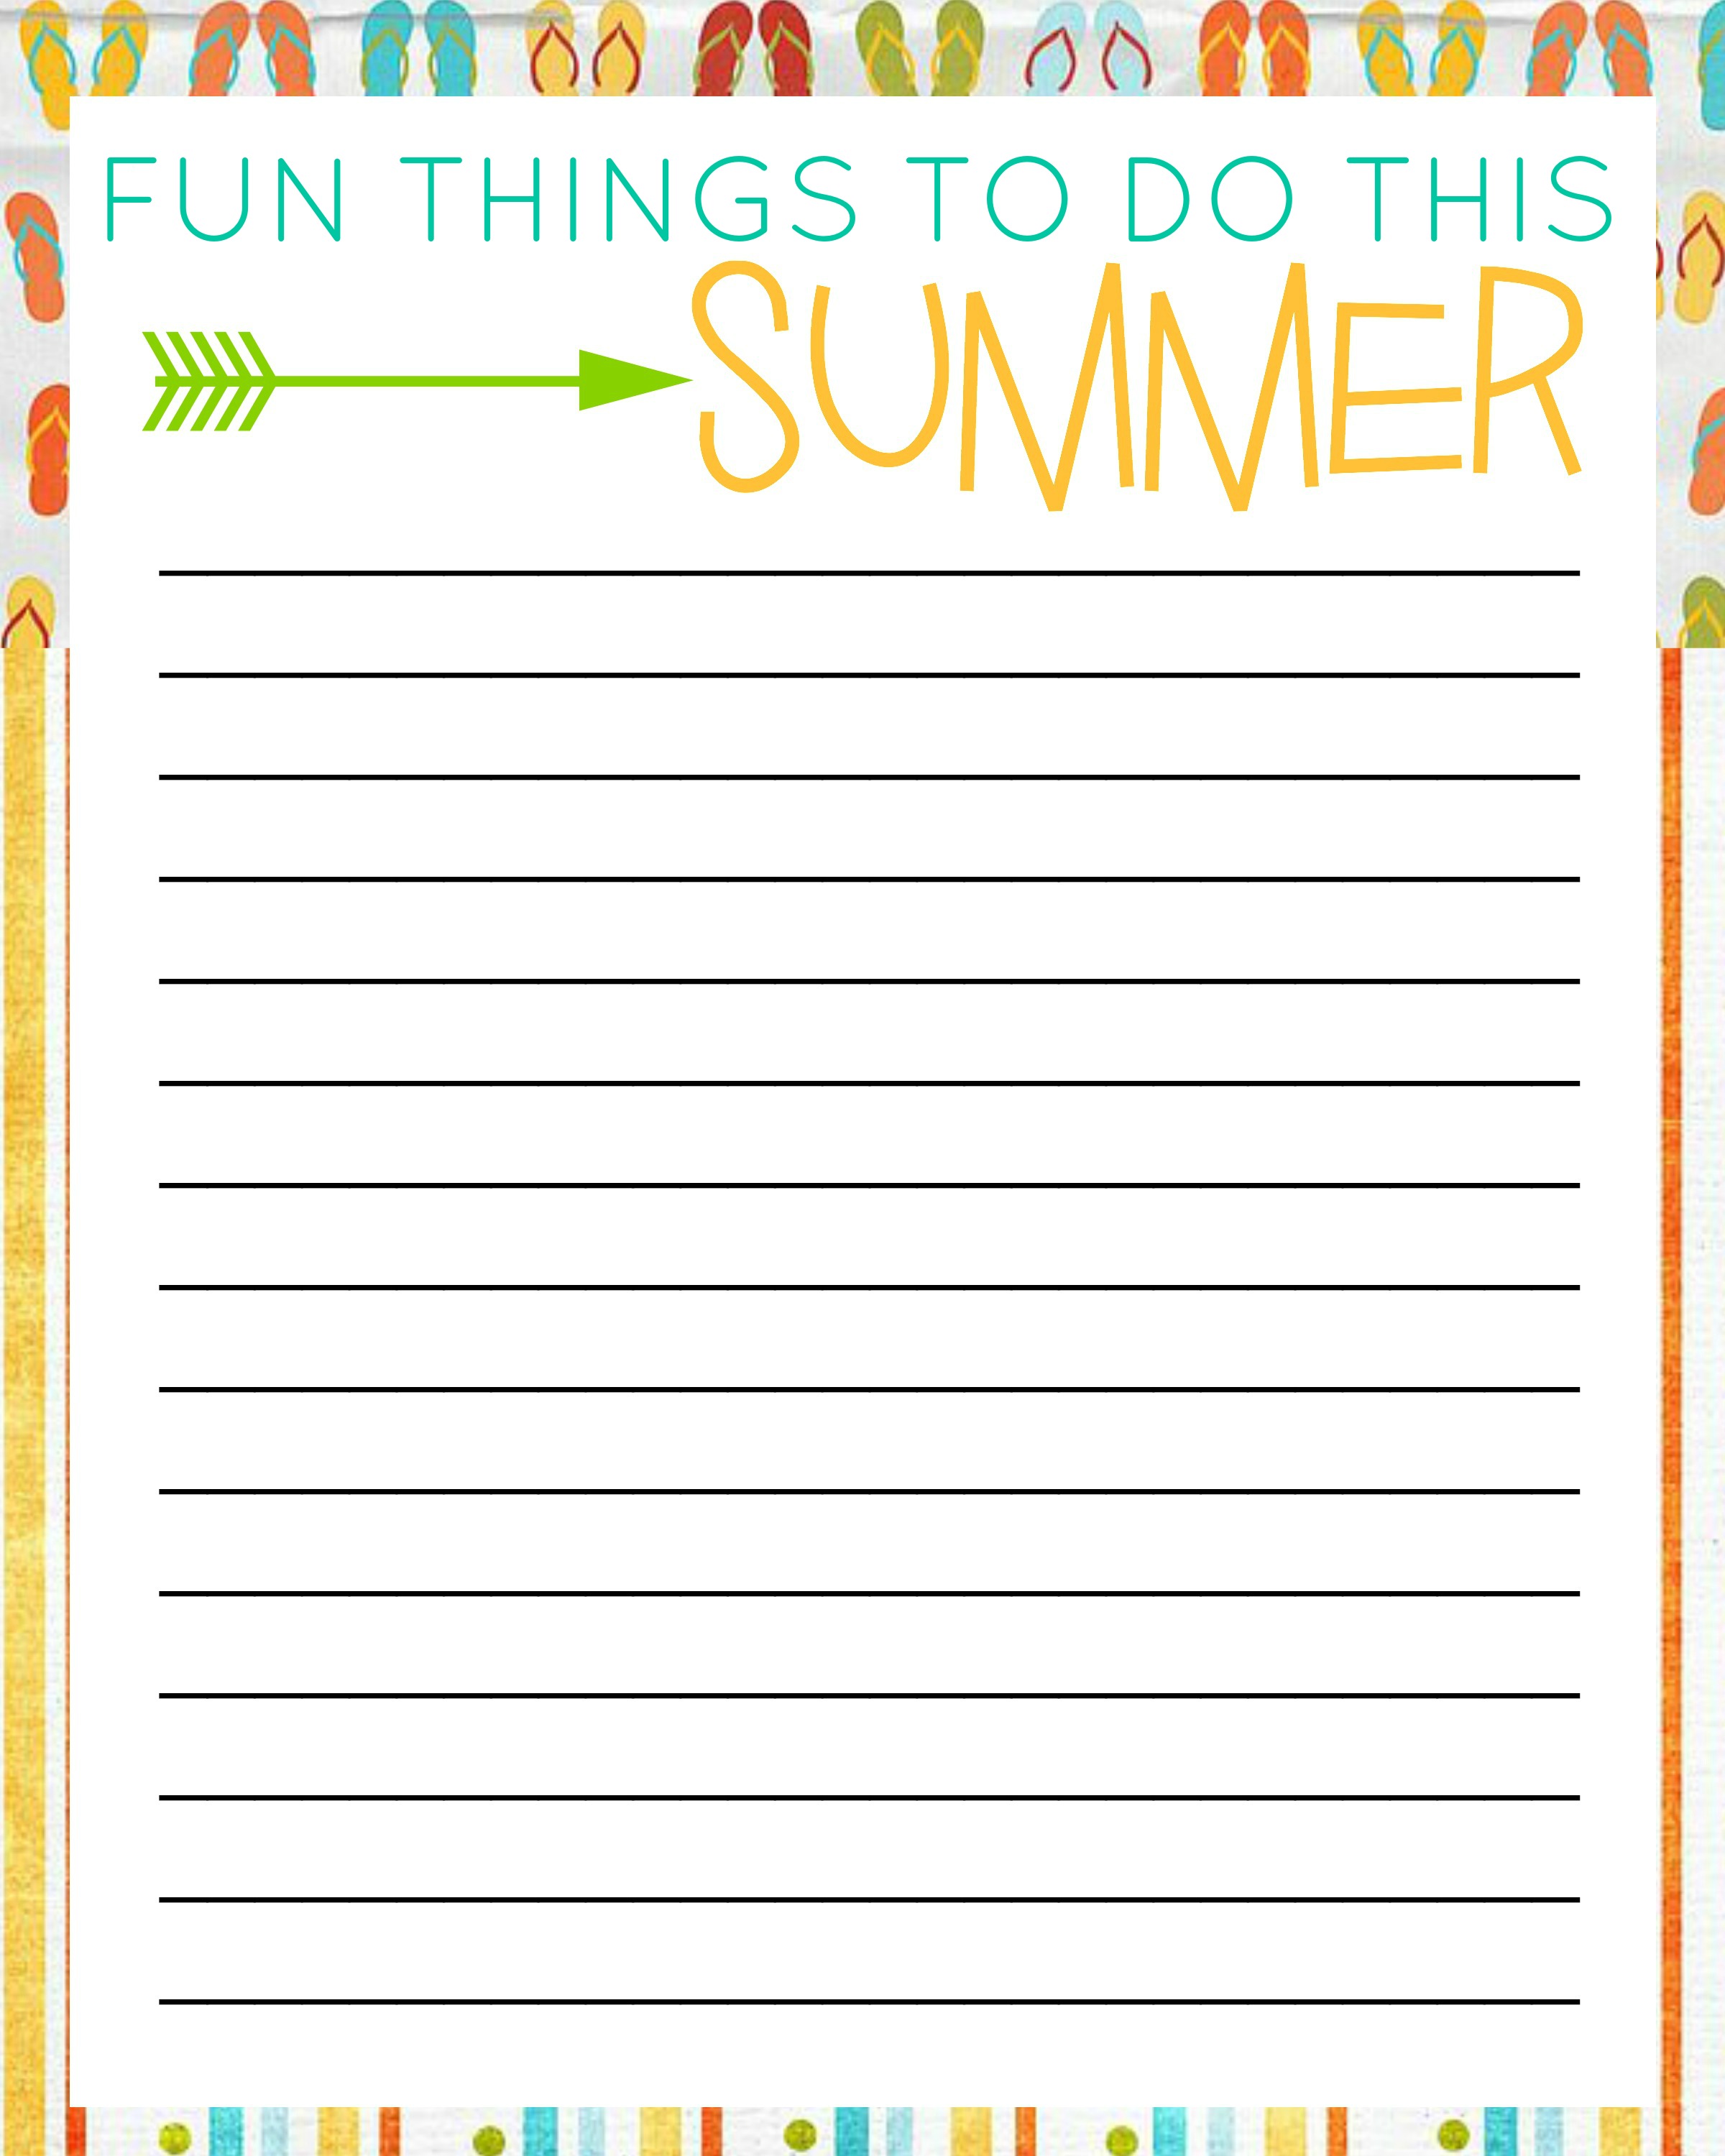 Summer Bucket List Free Printable – 101 Things To Do This Summer